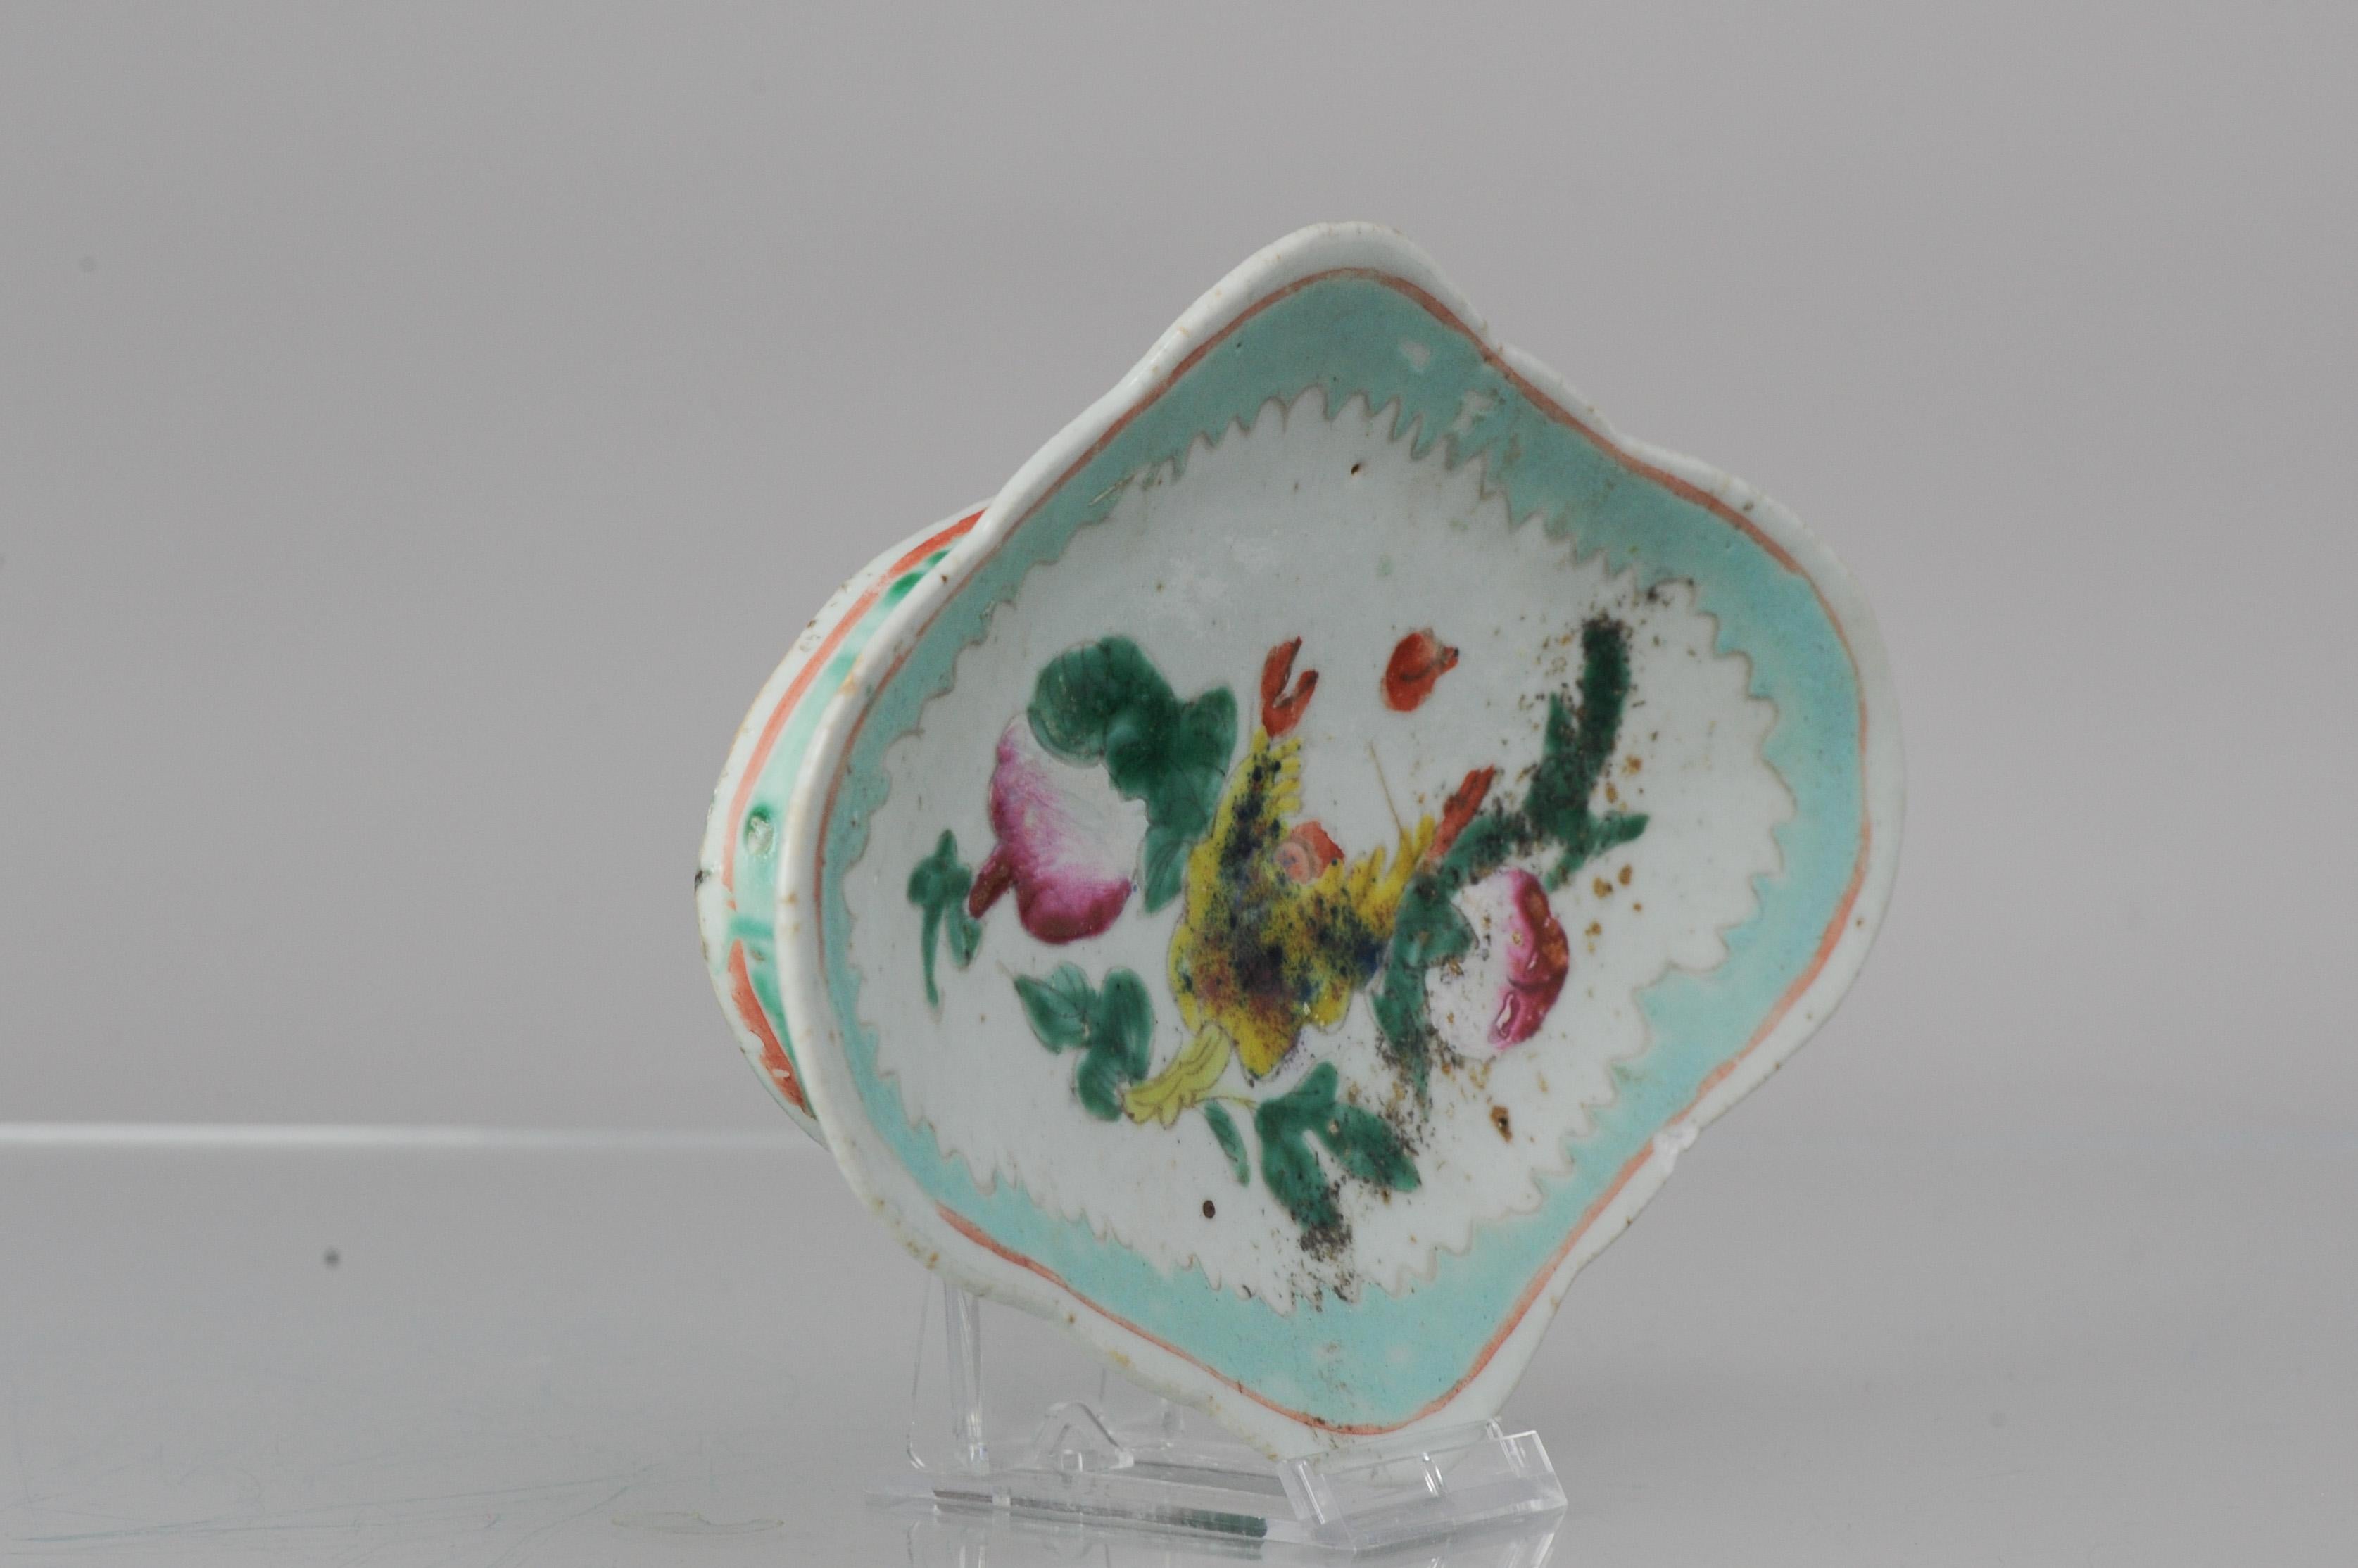 A high quality polychrome/famille rose bowl/altar dish from the 19th century. Delicate piece with unusual scene of flowers and fruits.

Additional information:
Material: Porcelain & Pottery
Type: Altar Dish
Region of Origin: China
Period: 19th